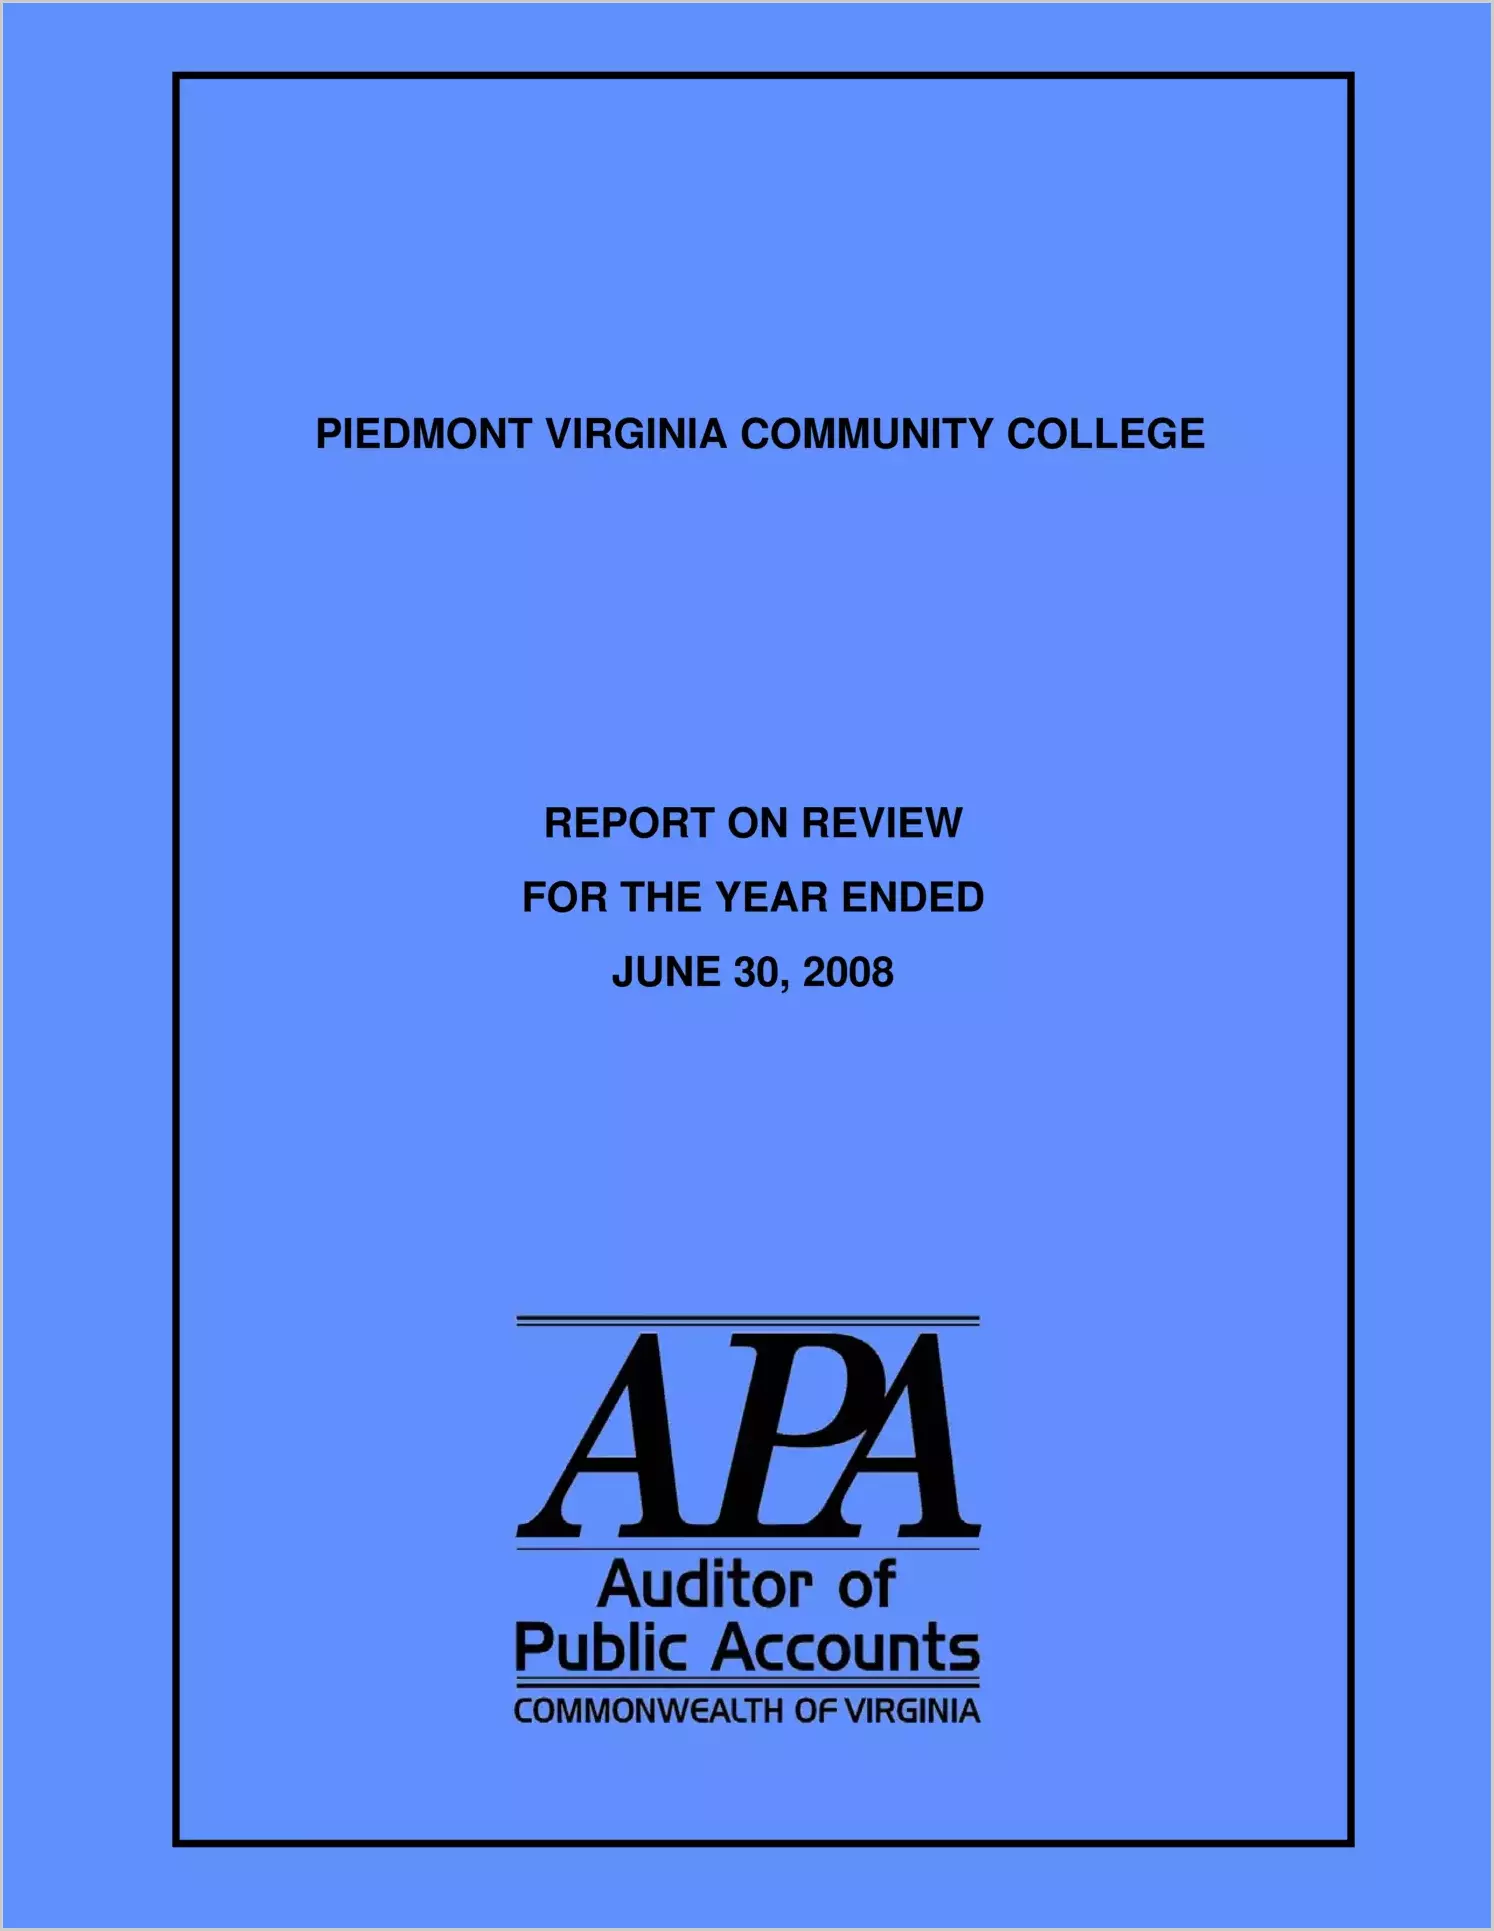 Piedmont Virginia Community College report on review for the year ended June 30, 2008